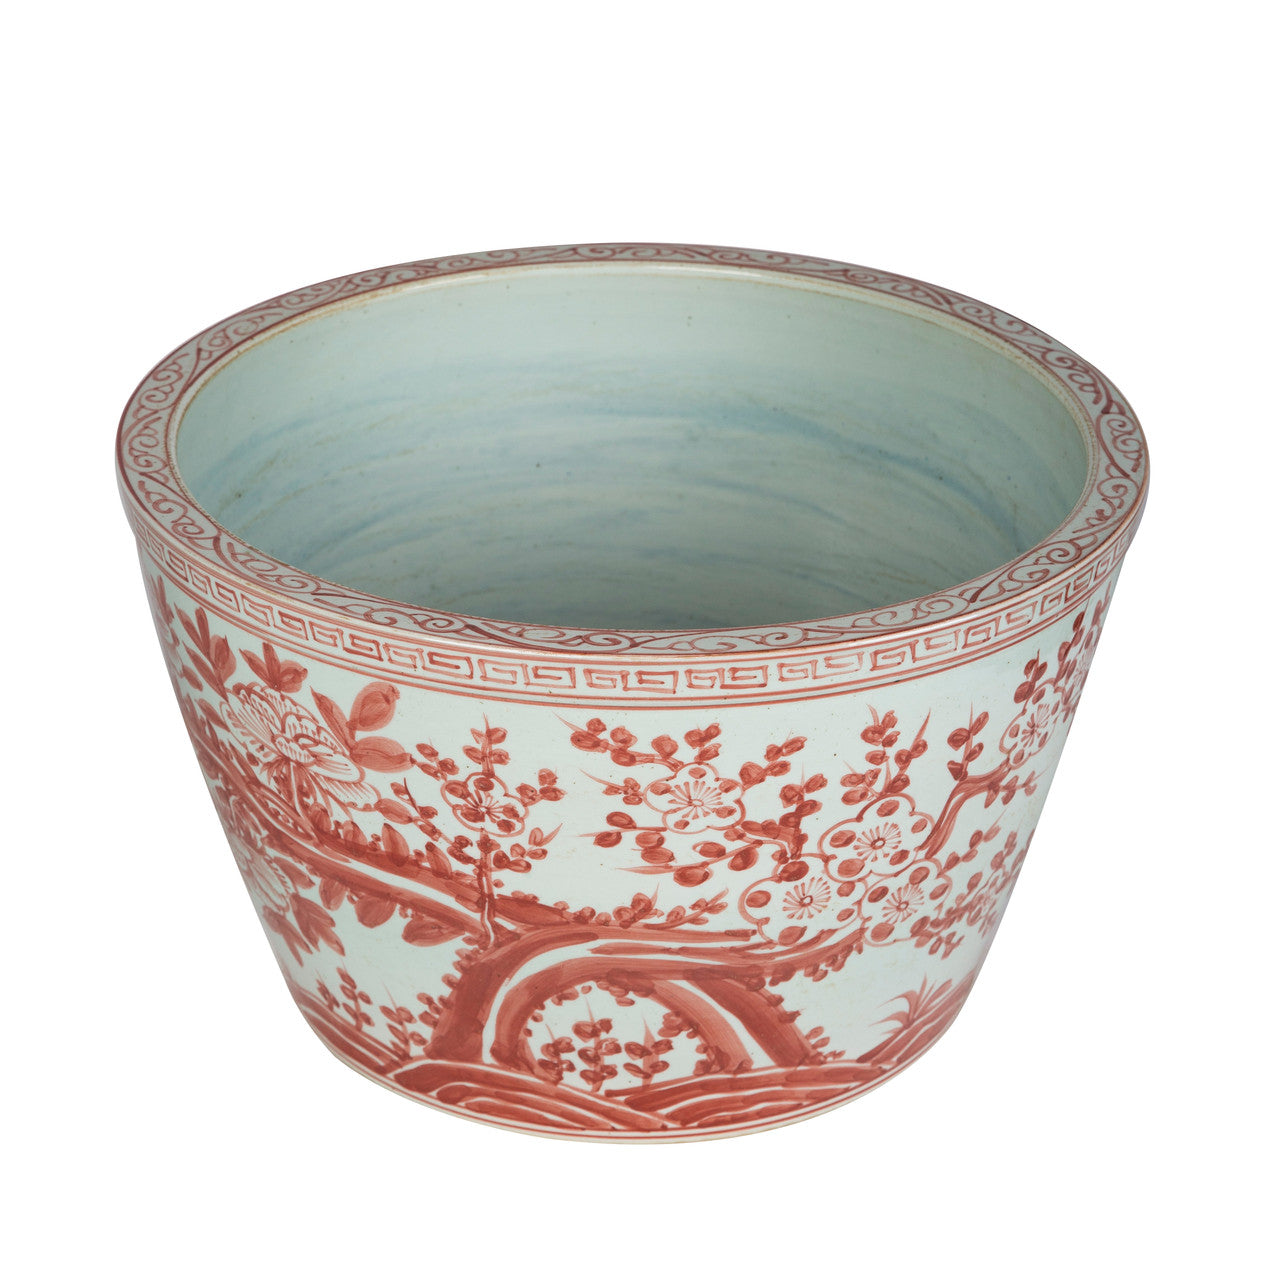 Coral Red Peony Porcelain Basin Planter